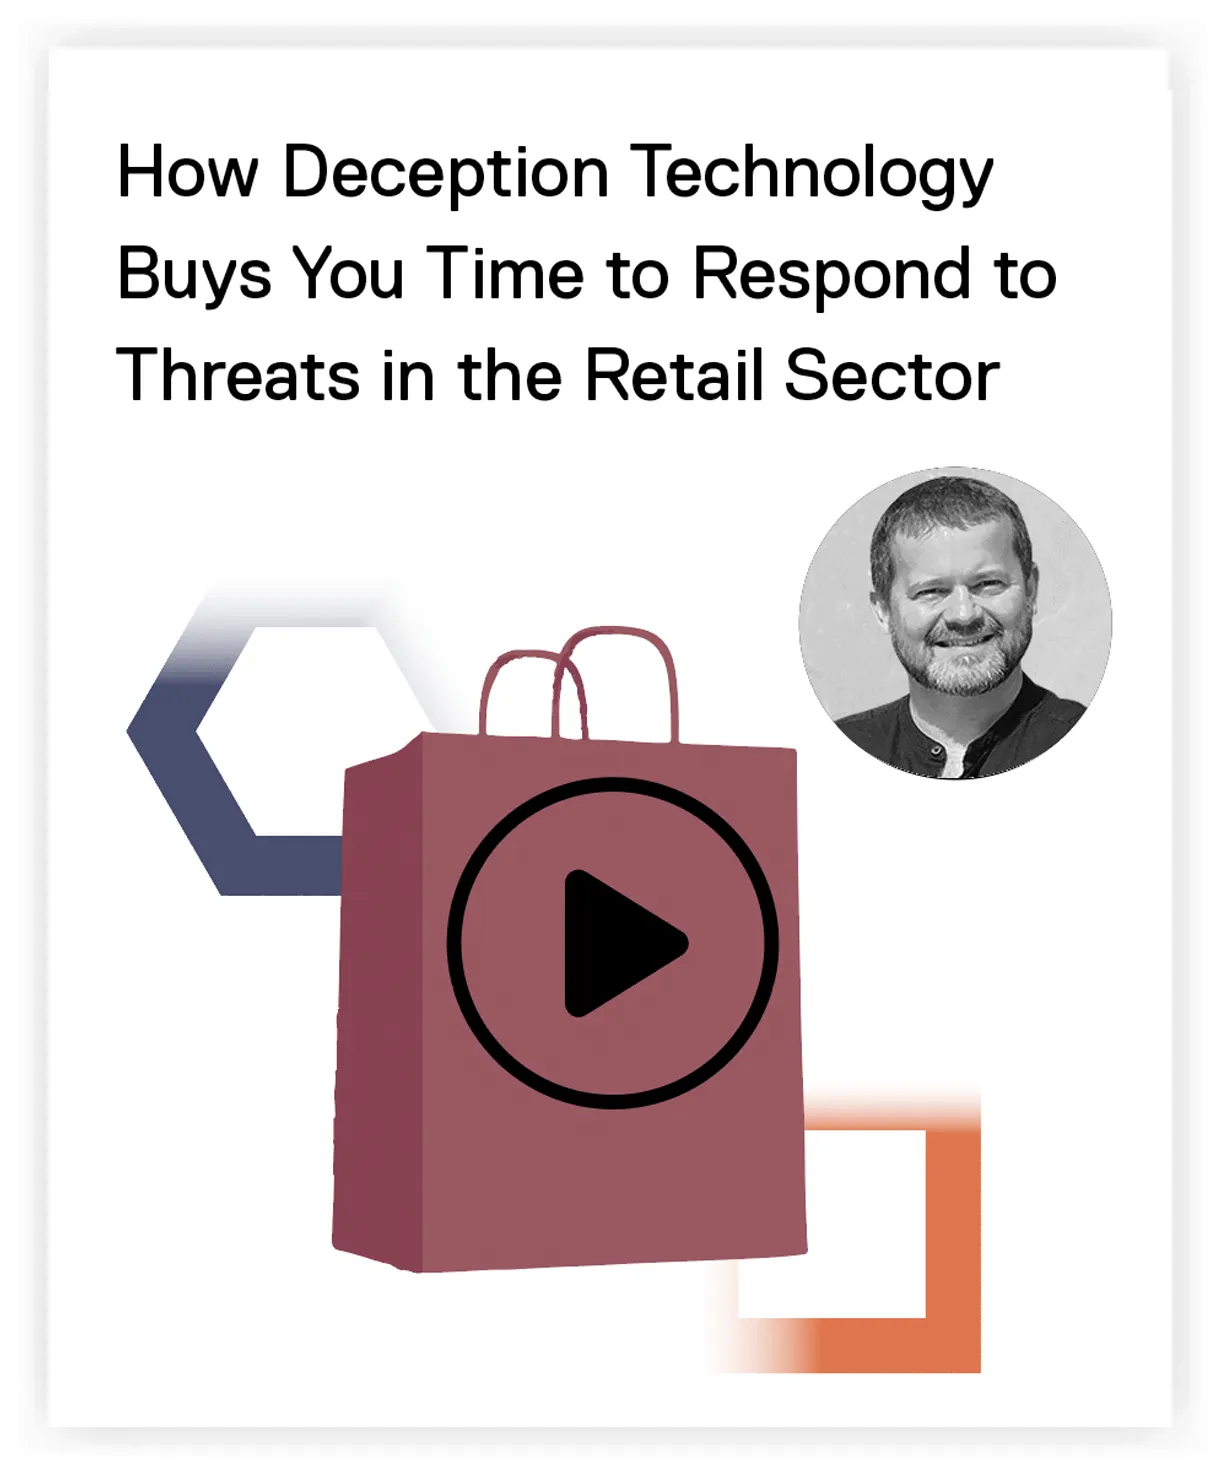 How deception technology buys you time to respond to threats in the retail sector?